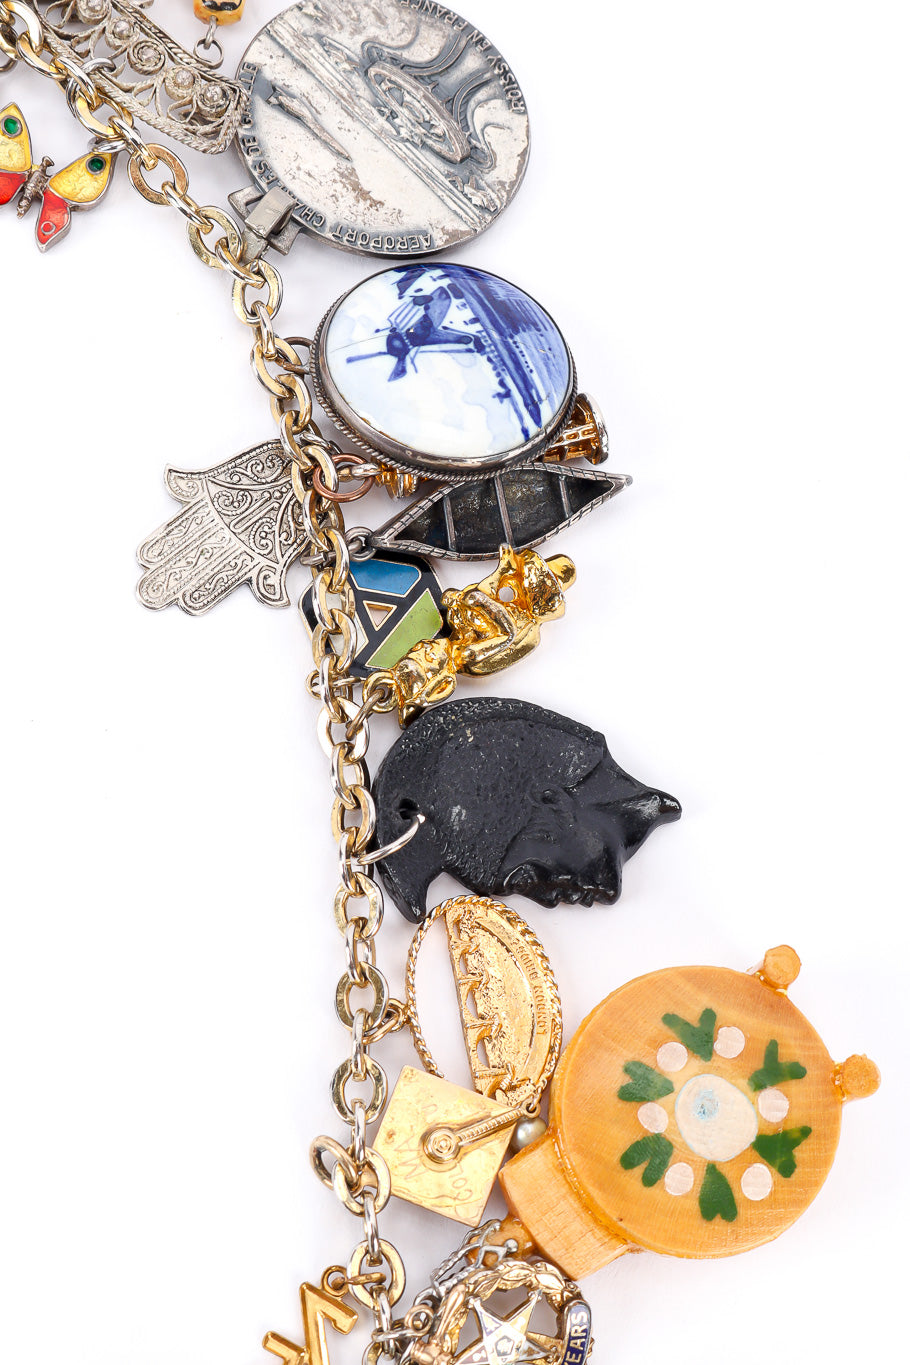 Charm necklace by Monet on white background windmill hamsa and assorted charms @recessla